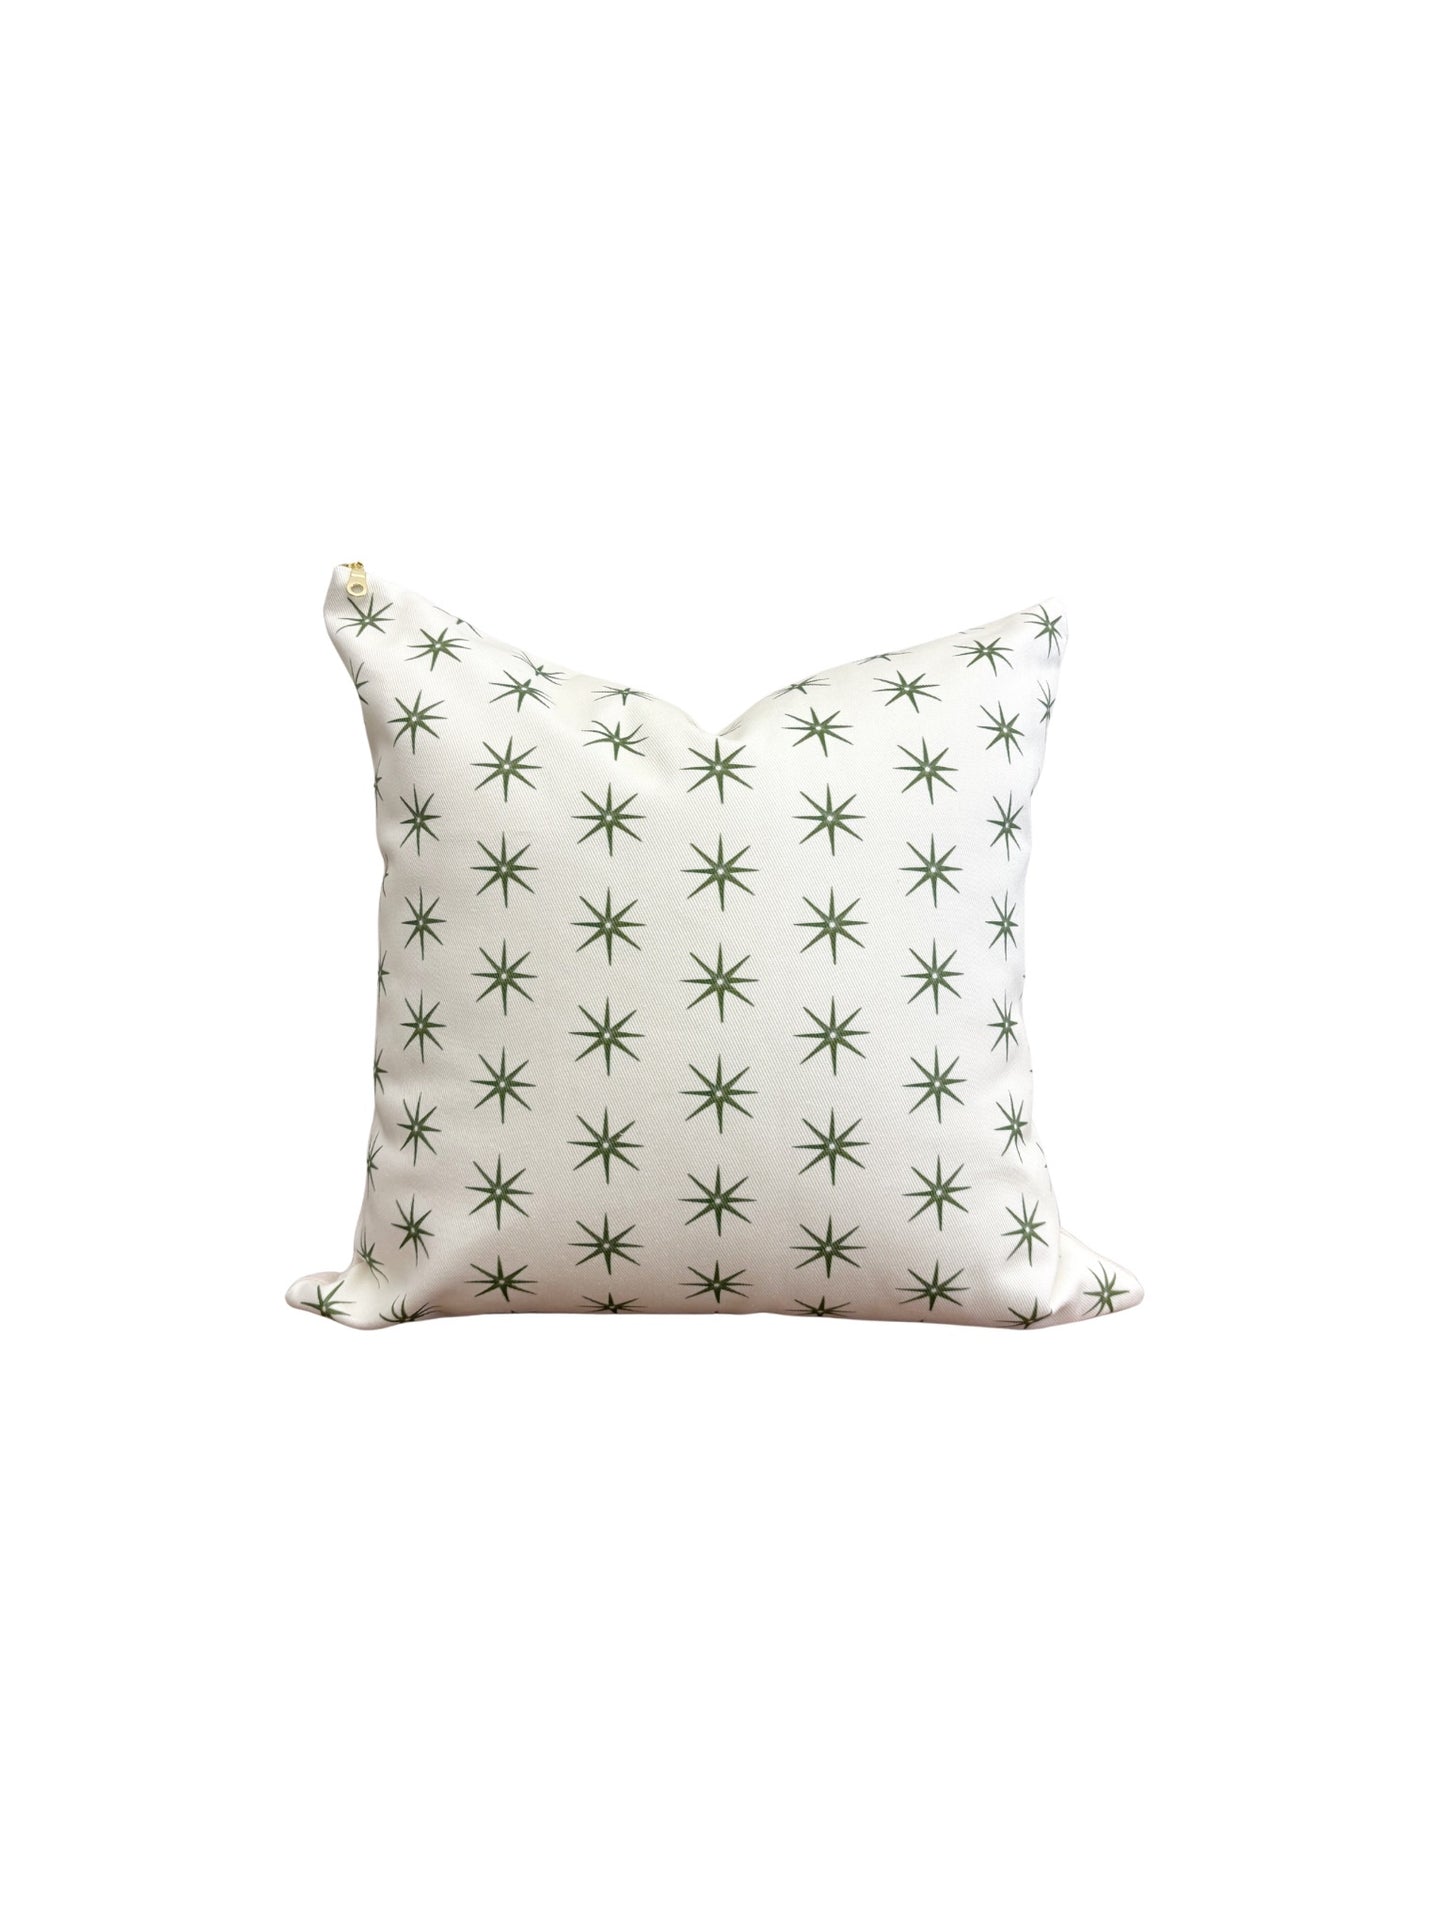 Olive and Cream Stars Pillow Cover